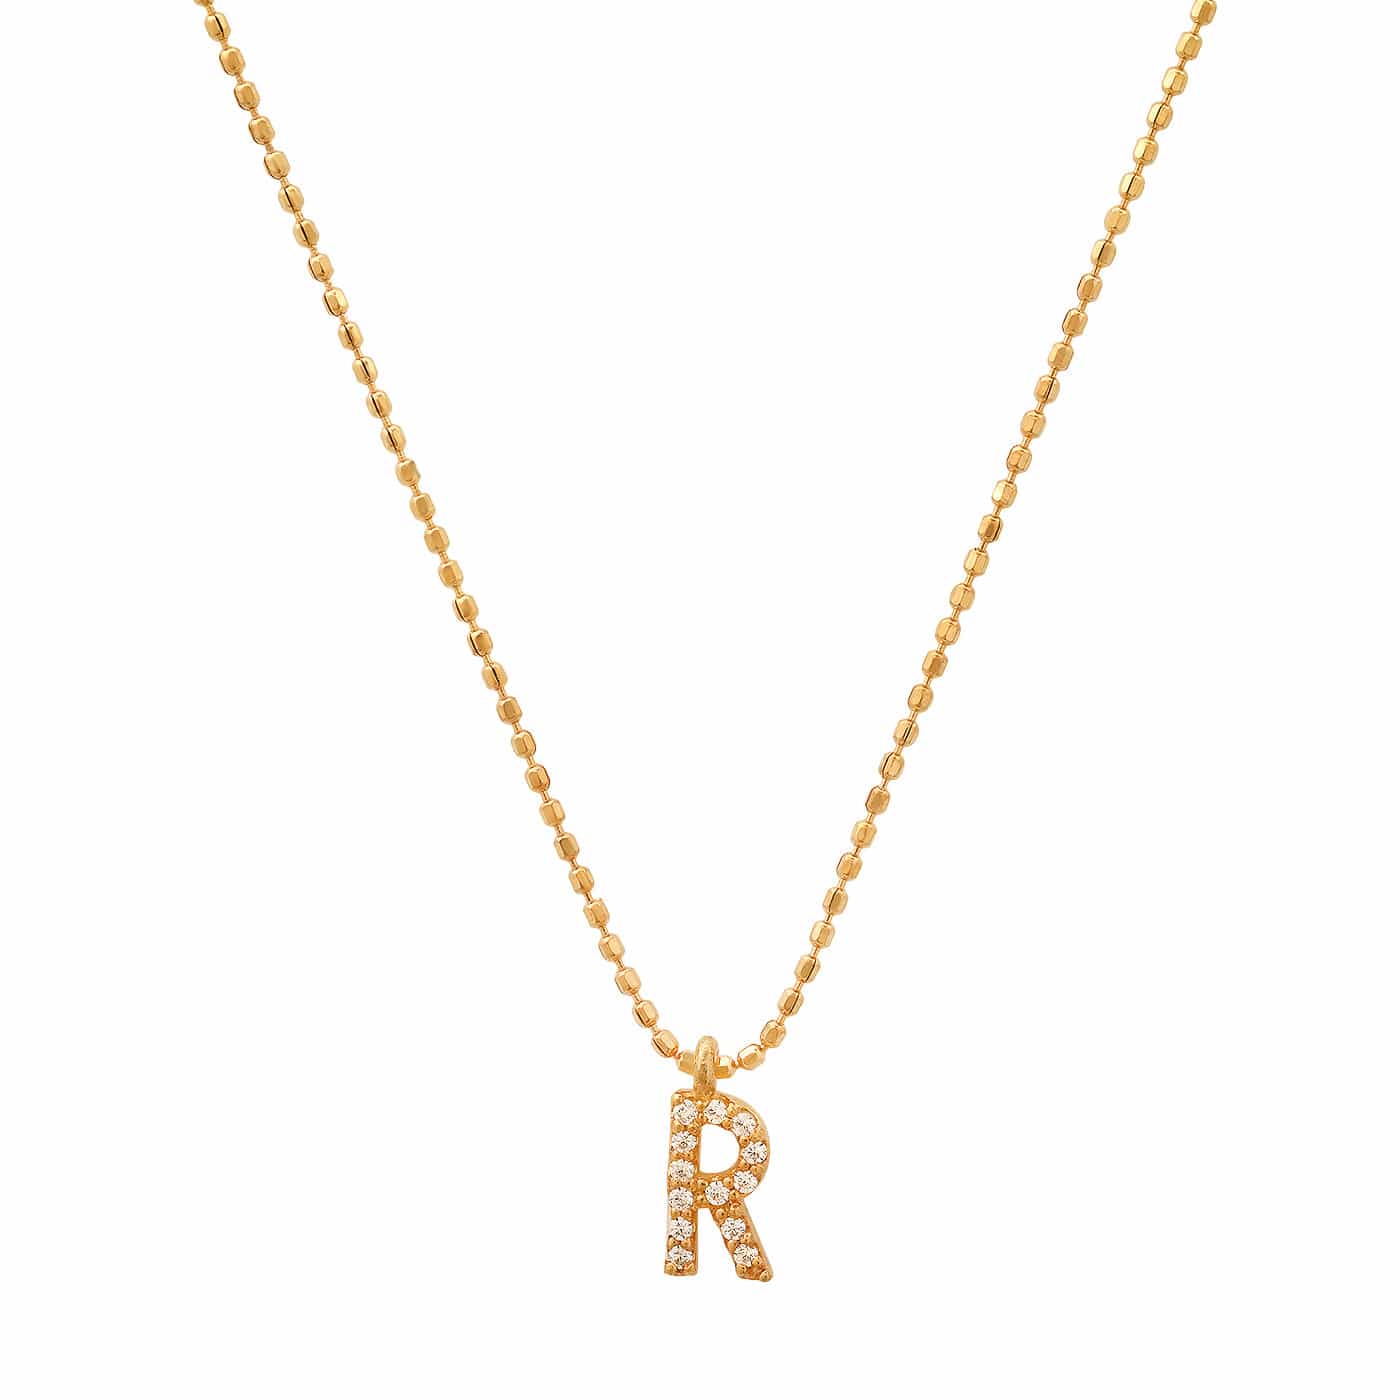 TAI JEWELRY Necklace R Pave Initial Ball Chain Necklace